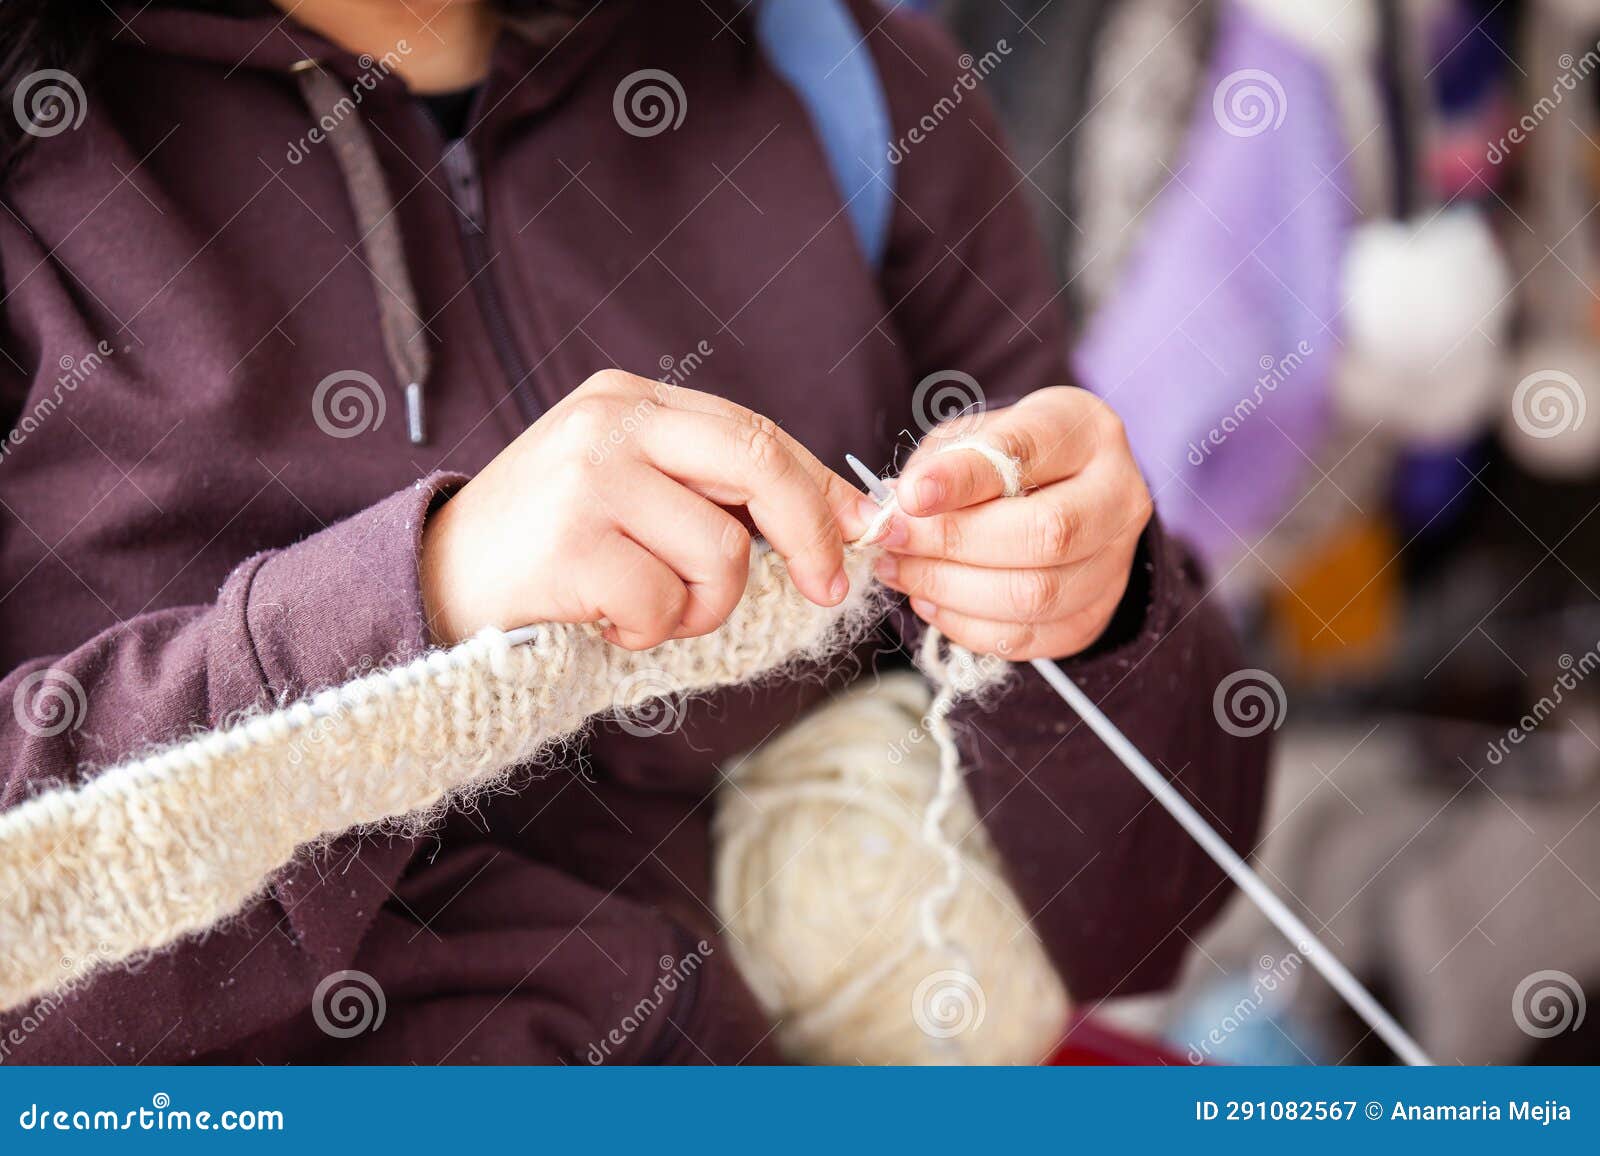 closeup of the hands of a woman weaving a traditional ruana from the town of nobsa in the department of boyaca in colombia